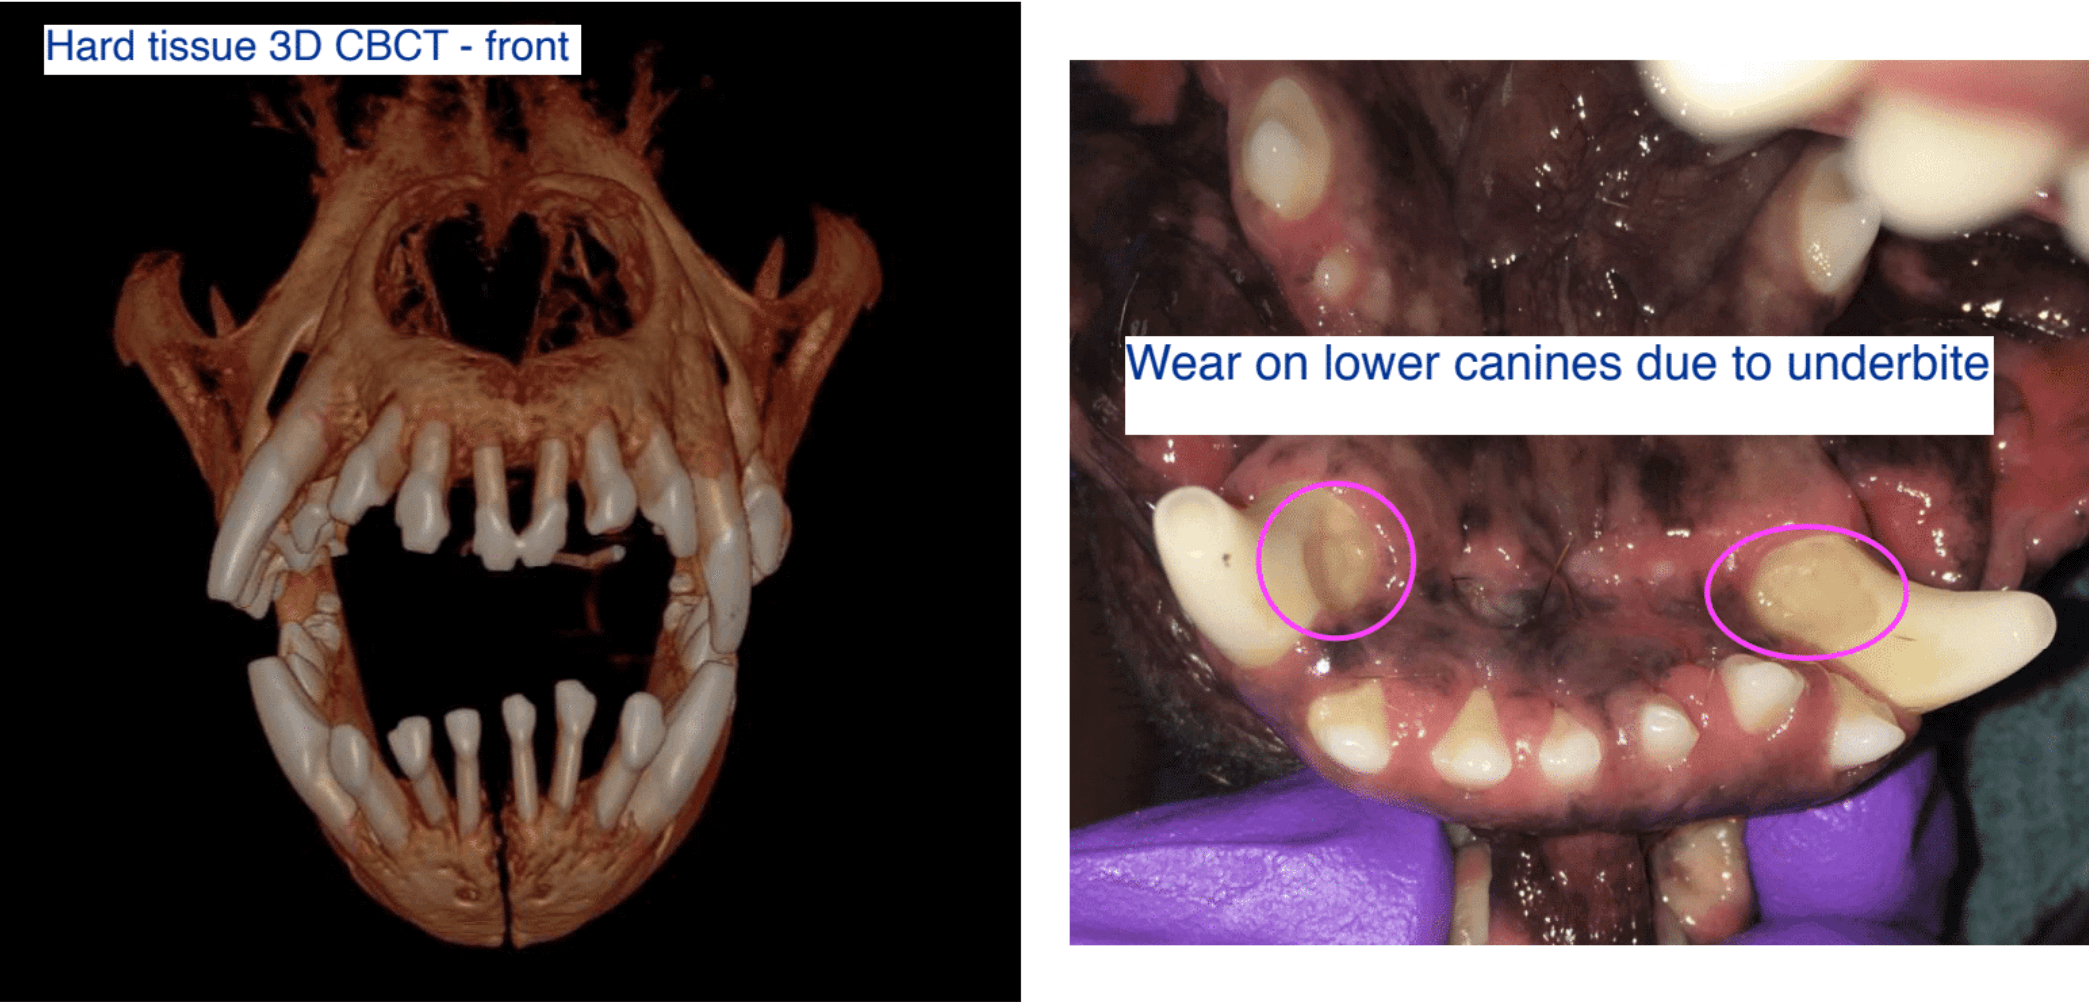 Left - Hard tissue 3d CBCT - Front Right - Wear on lower canines due to underbite